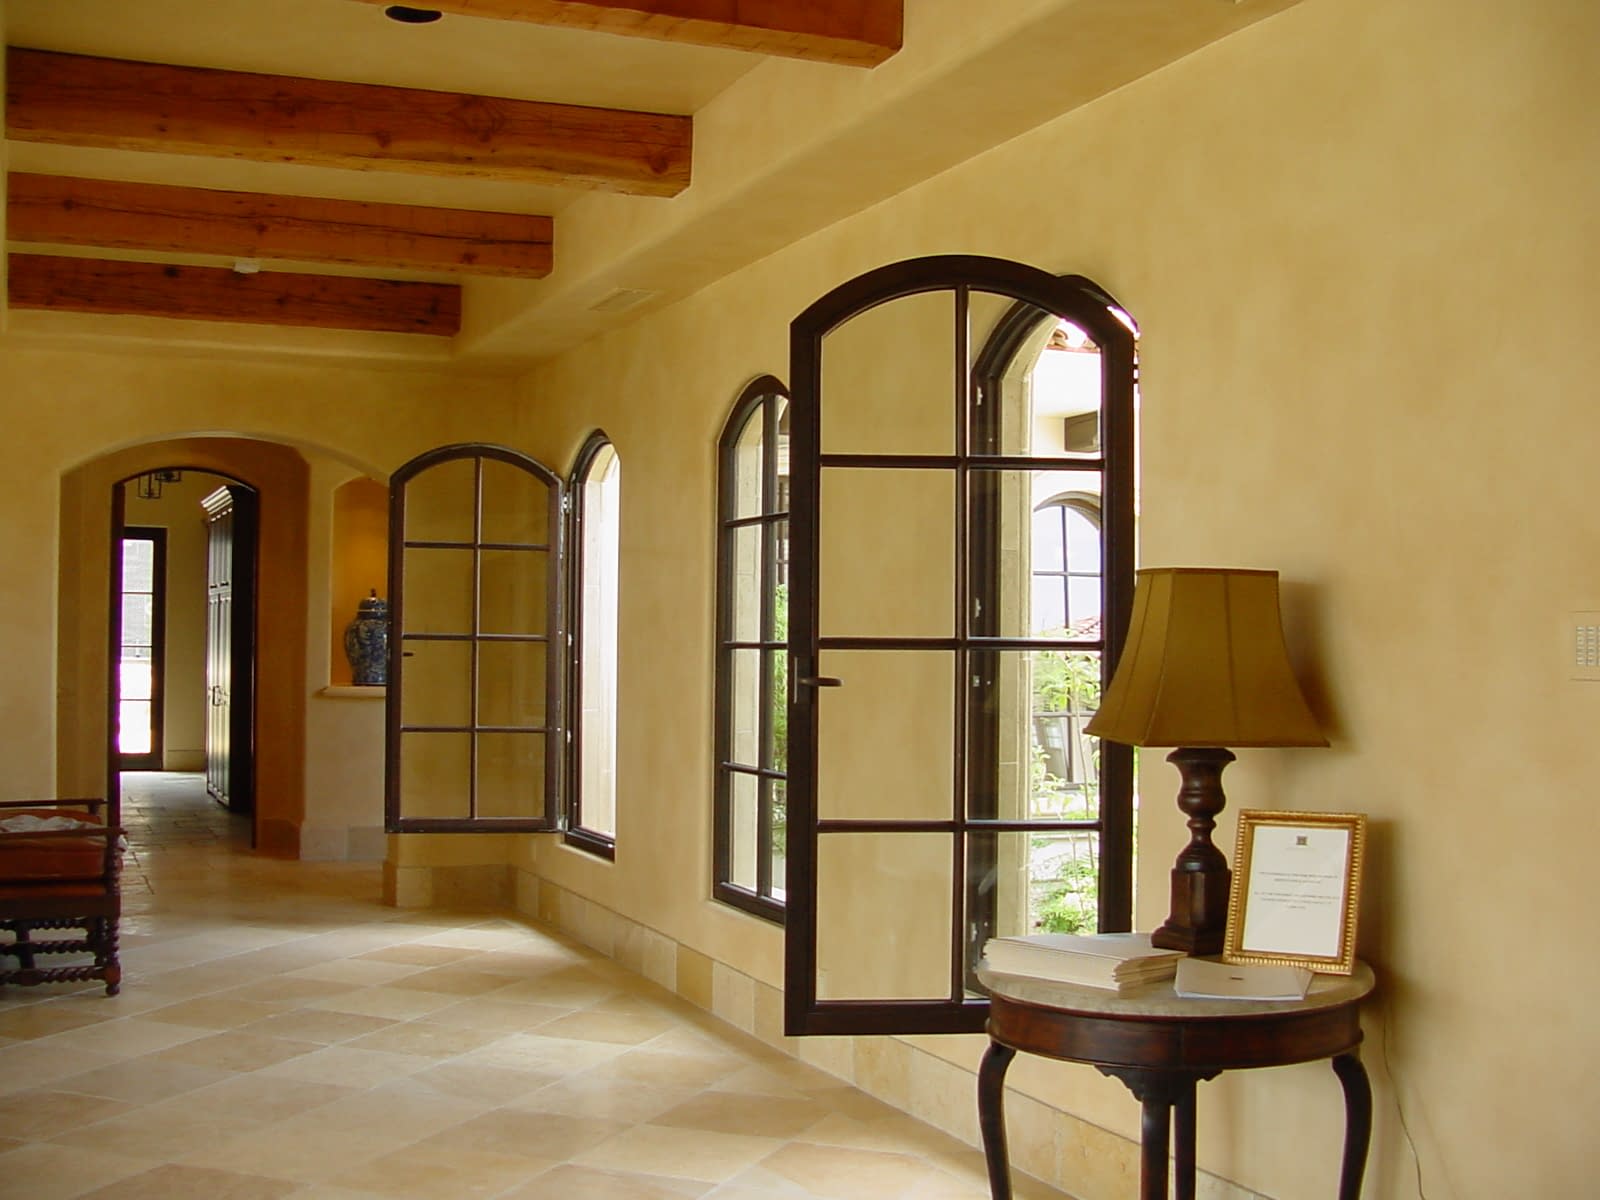 Arched wood tilt turn windows in this estate allows for airflow control